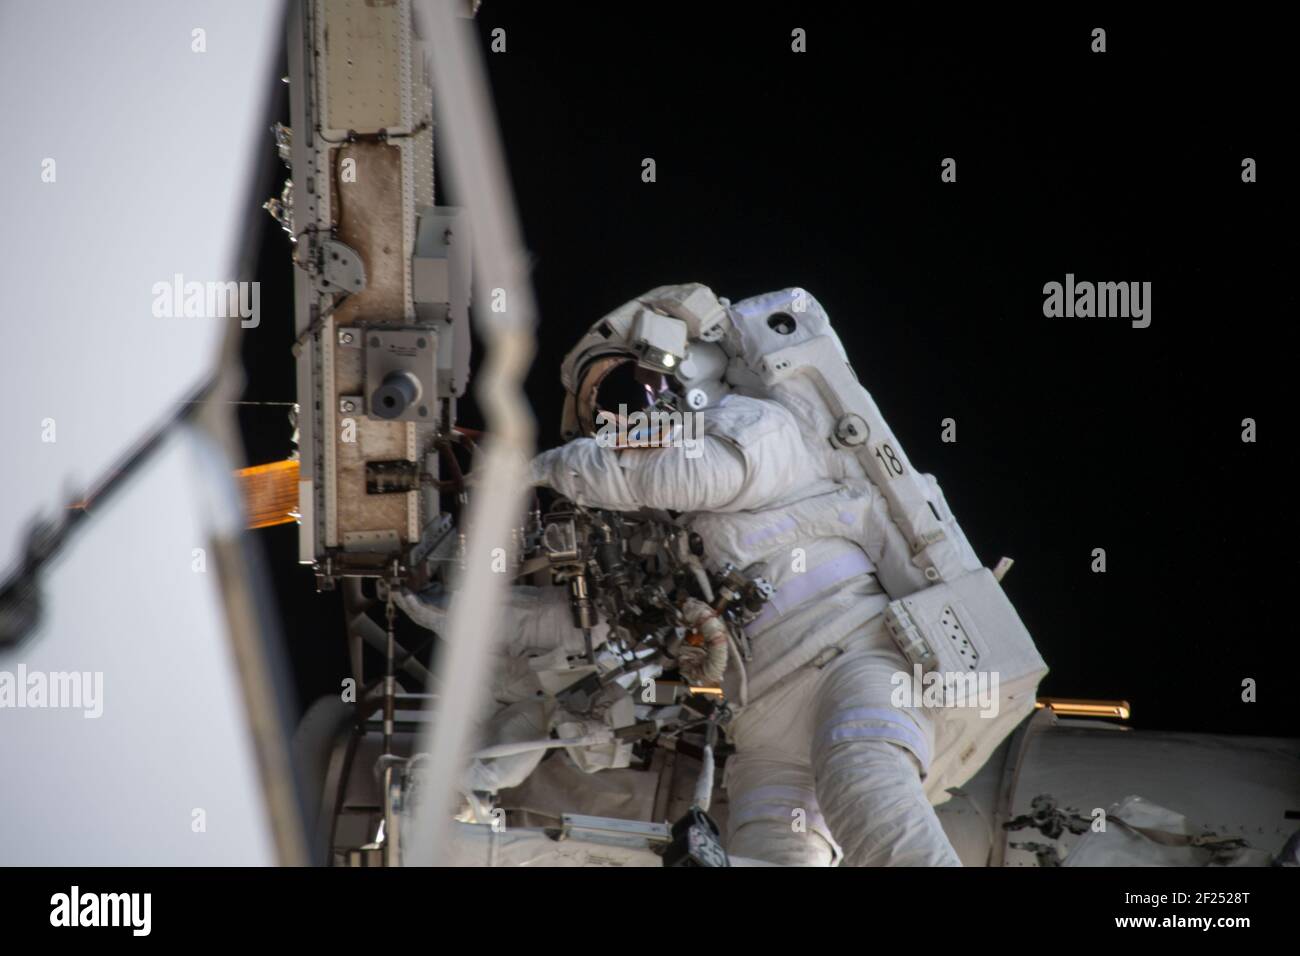 Japan Aerospace Exploration Agency astronaut Soichi Noguchi during a spacewalk to install solar array modification kits on the International Space Station March 5, 2021 in Earth Orbit. The maintenance work will support new, more powerful solar arrays that will be delivered on upcoming SpaceX Dragon cargo missions. Stock Photo